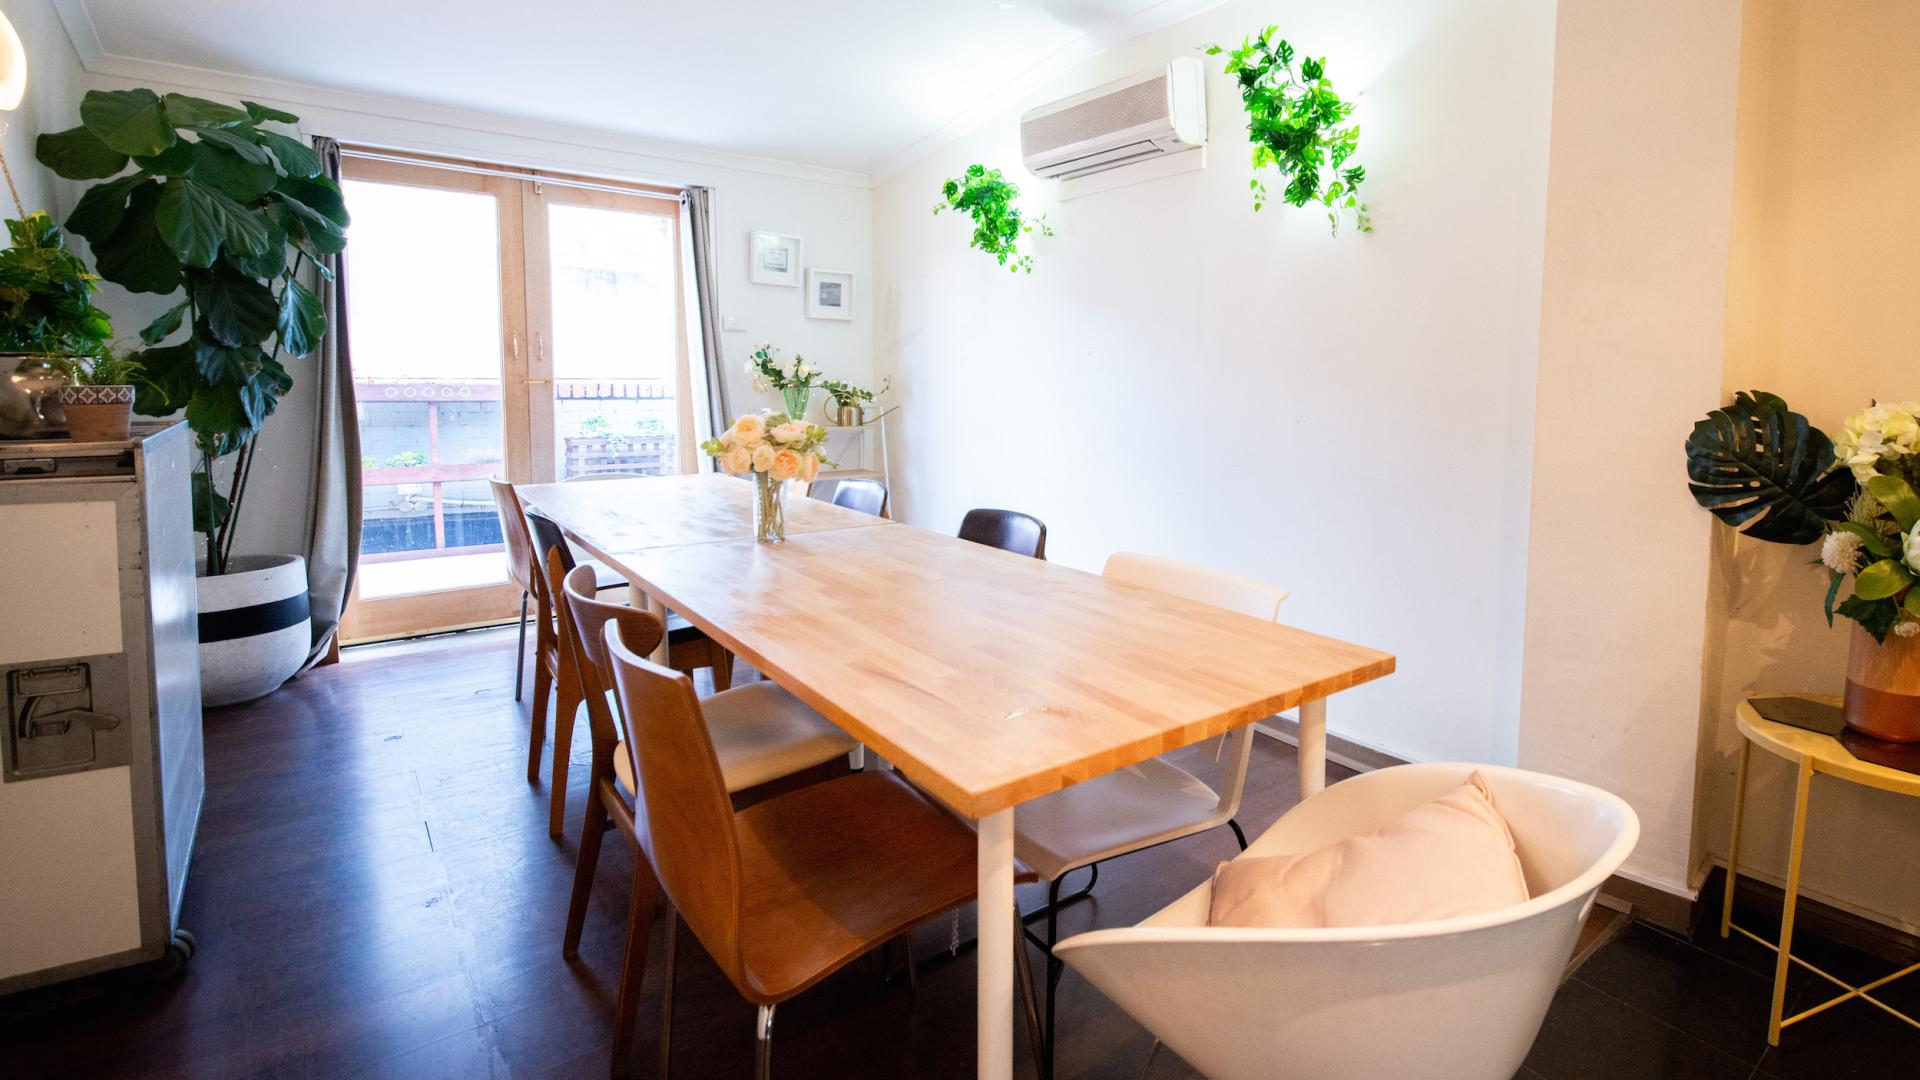 Meeting Rooms for Hire in Western Sydney